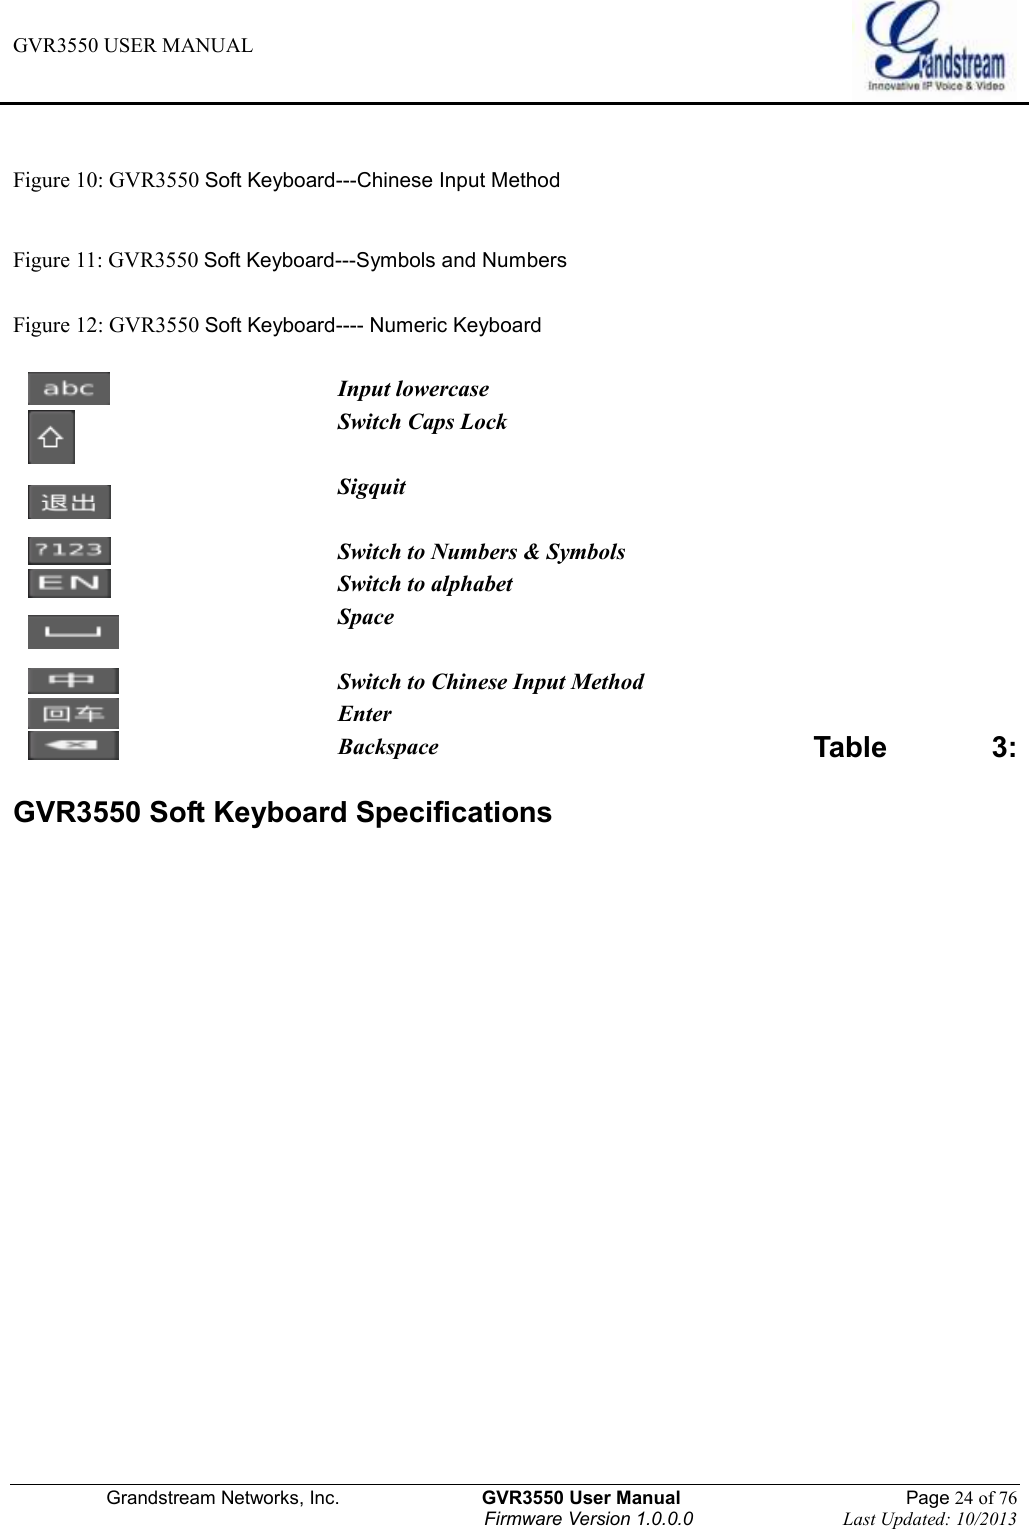 GVR3550 USER MANUAL   Grandstream Networks, Inc.                    GVR3550 User Manual                                                Page 24 of 76 Firmware Version 1.0.0.0                                Last Updated: 10/2013   Figure 10: GVR3550 Soft Keyboard---Chinese Input Method  Figure 11: GVR3550 Soft Keyboard---Symbols and Numbers  Figure 12: GVR3550 Soft Keyboard---- Numeric Keyboard            Table  3: GVR3550 Soft Keyboard Specifications          Input lowercase  Switch Caps Lock  Sigquit  Switch to Numbers &amp; Symbols  Switch to alphabet  Space  Switch to Chinese Input Method  Enter  Backspace 